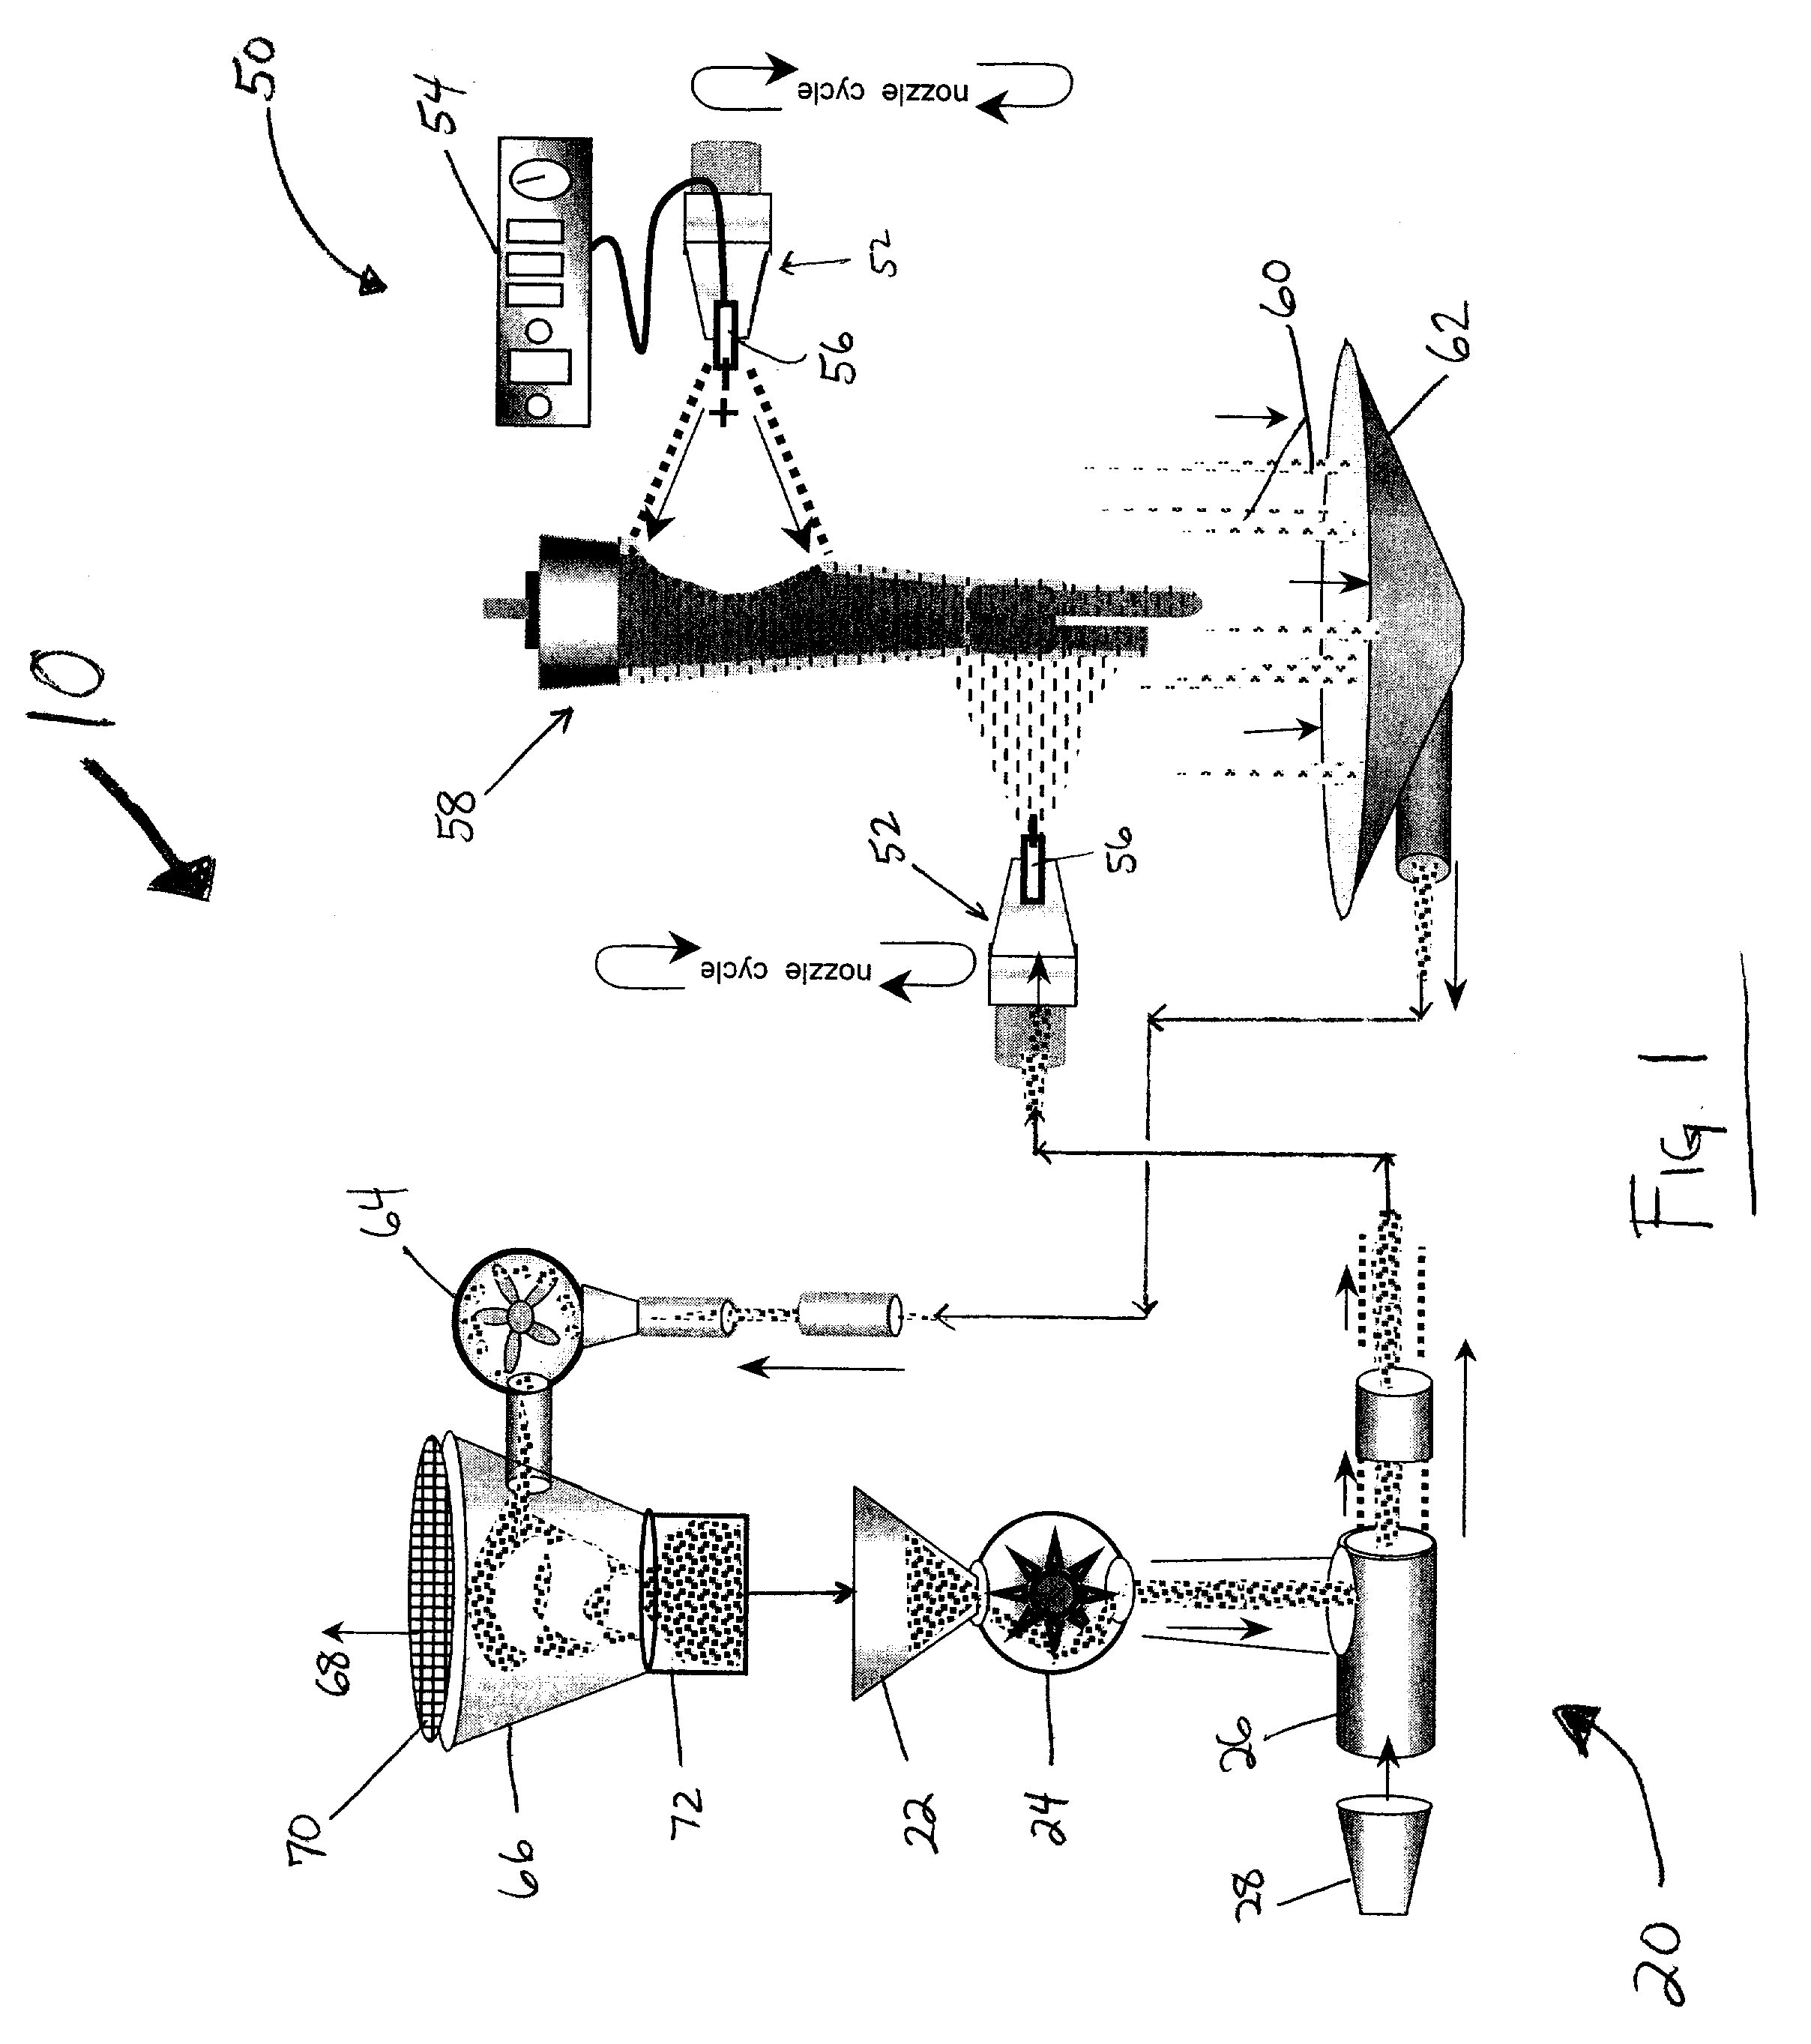 Electrostatic flocking and articles made therefrom